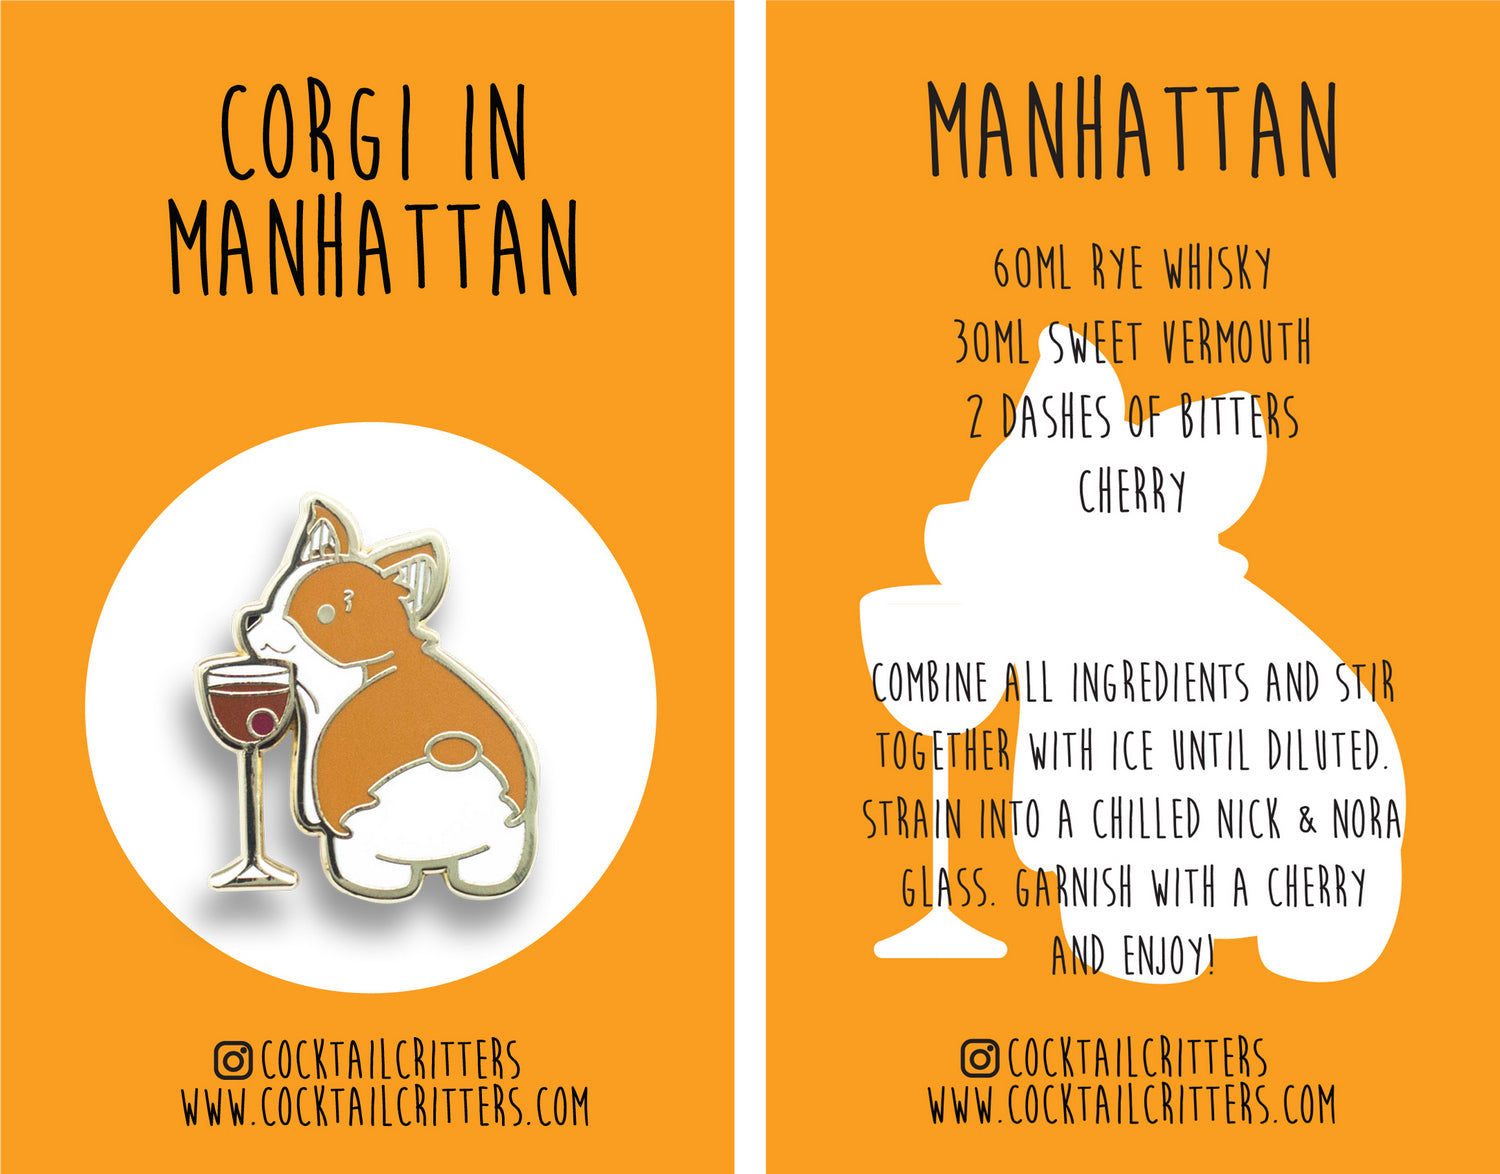 Corgi and Manhattan Cocktail Hard Enamel Pin by Cocktail Critters